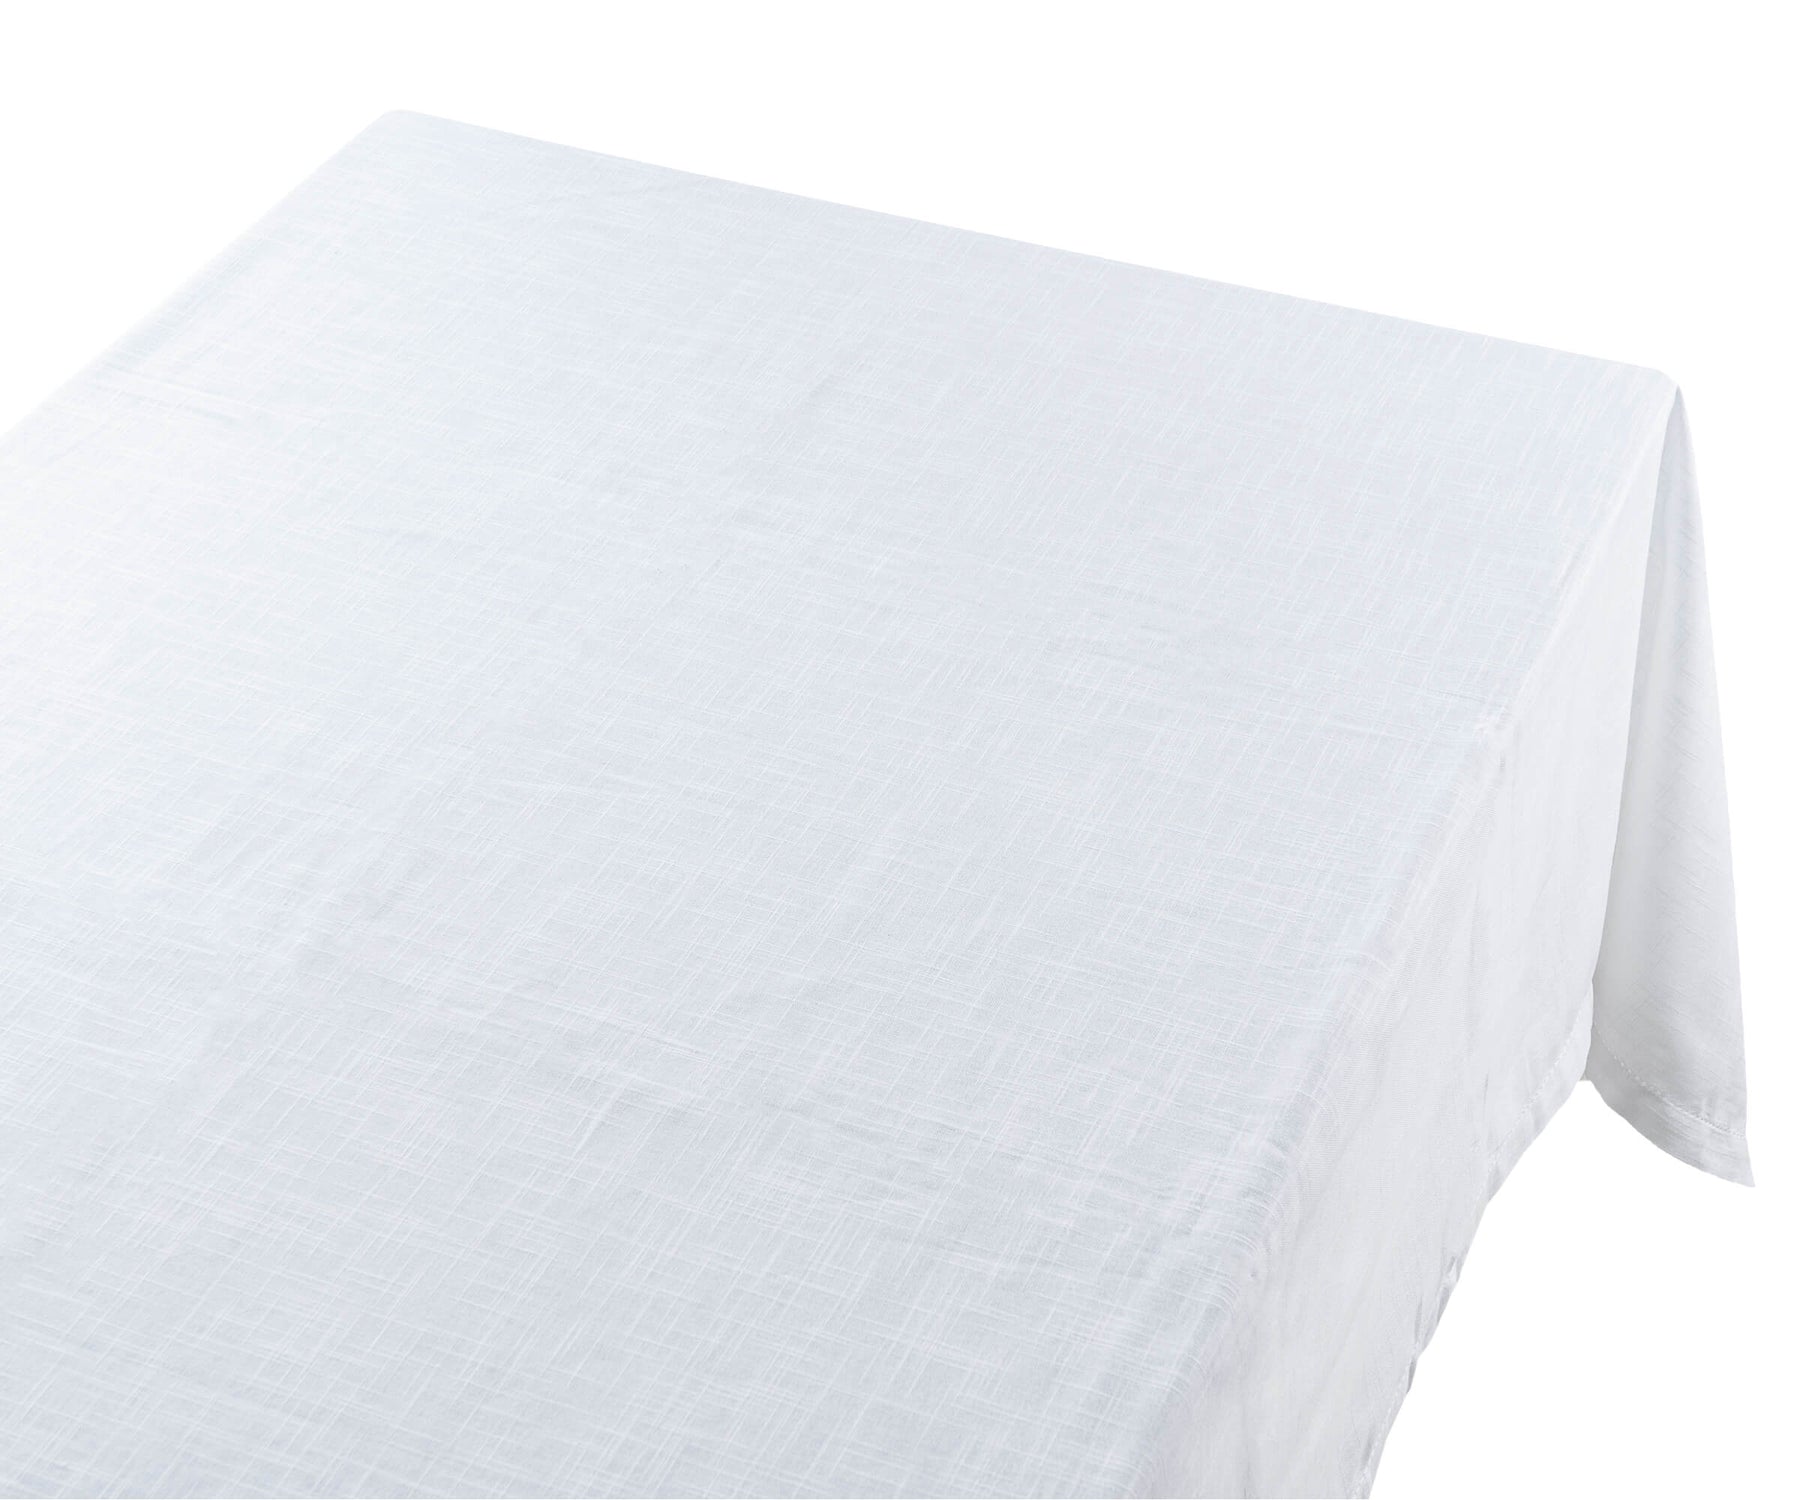 hemstitch tablecloths for rectangle tables 60 x 120 washable dining table linen